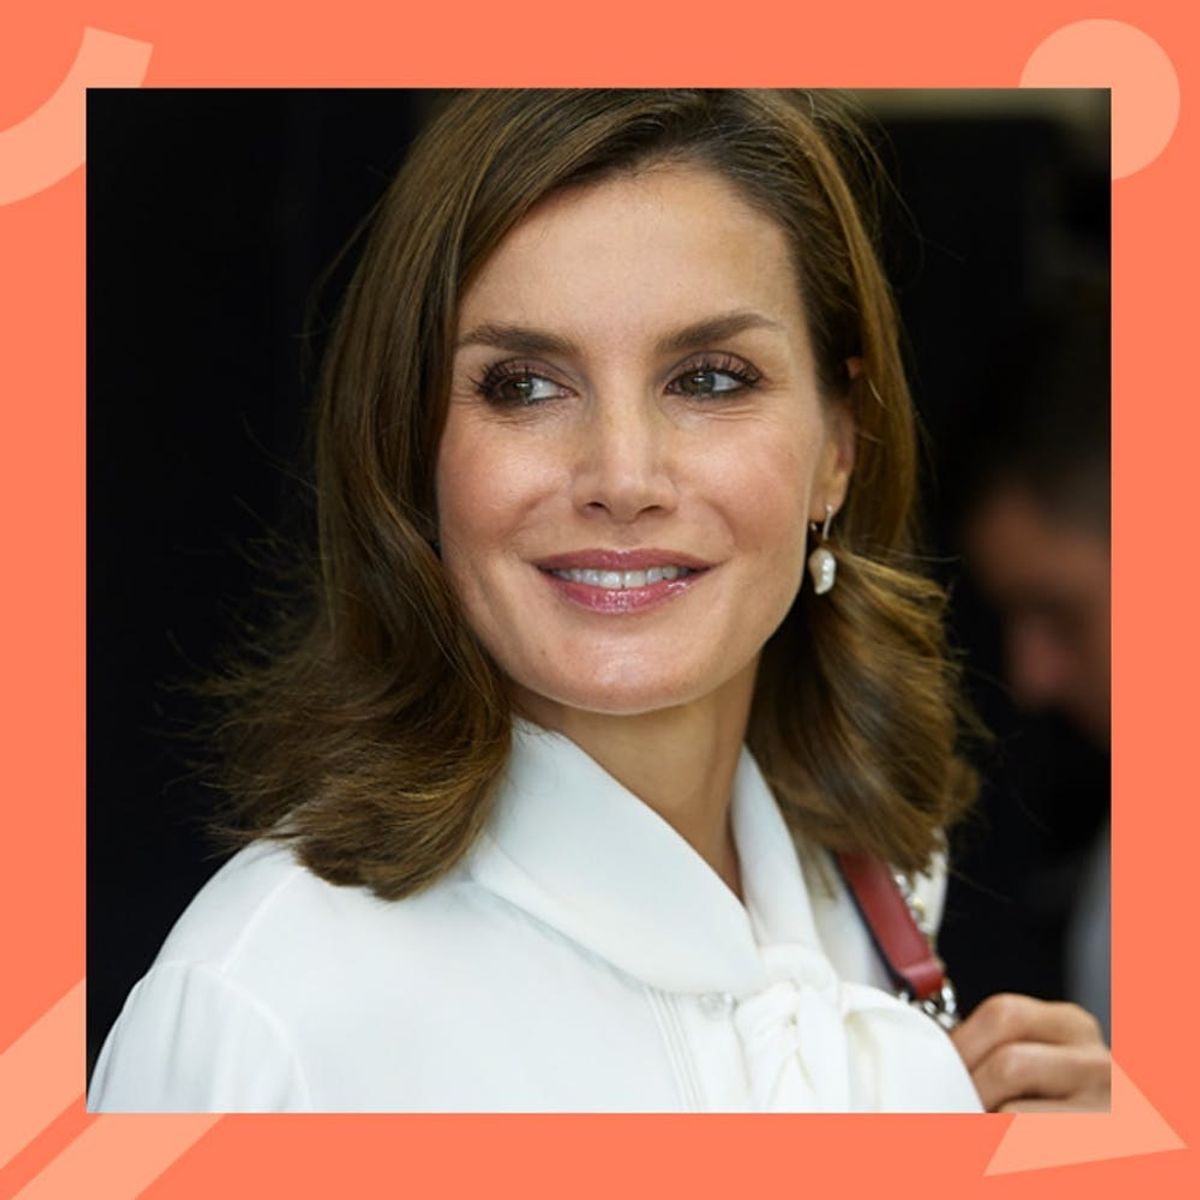 You Can Still Score This $90 Zara Dress Rocked by Queen Letizia